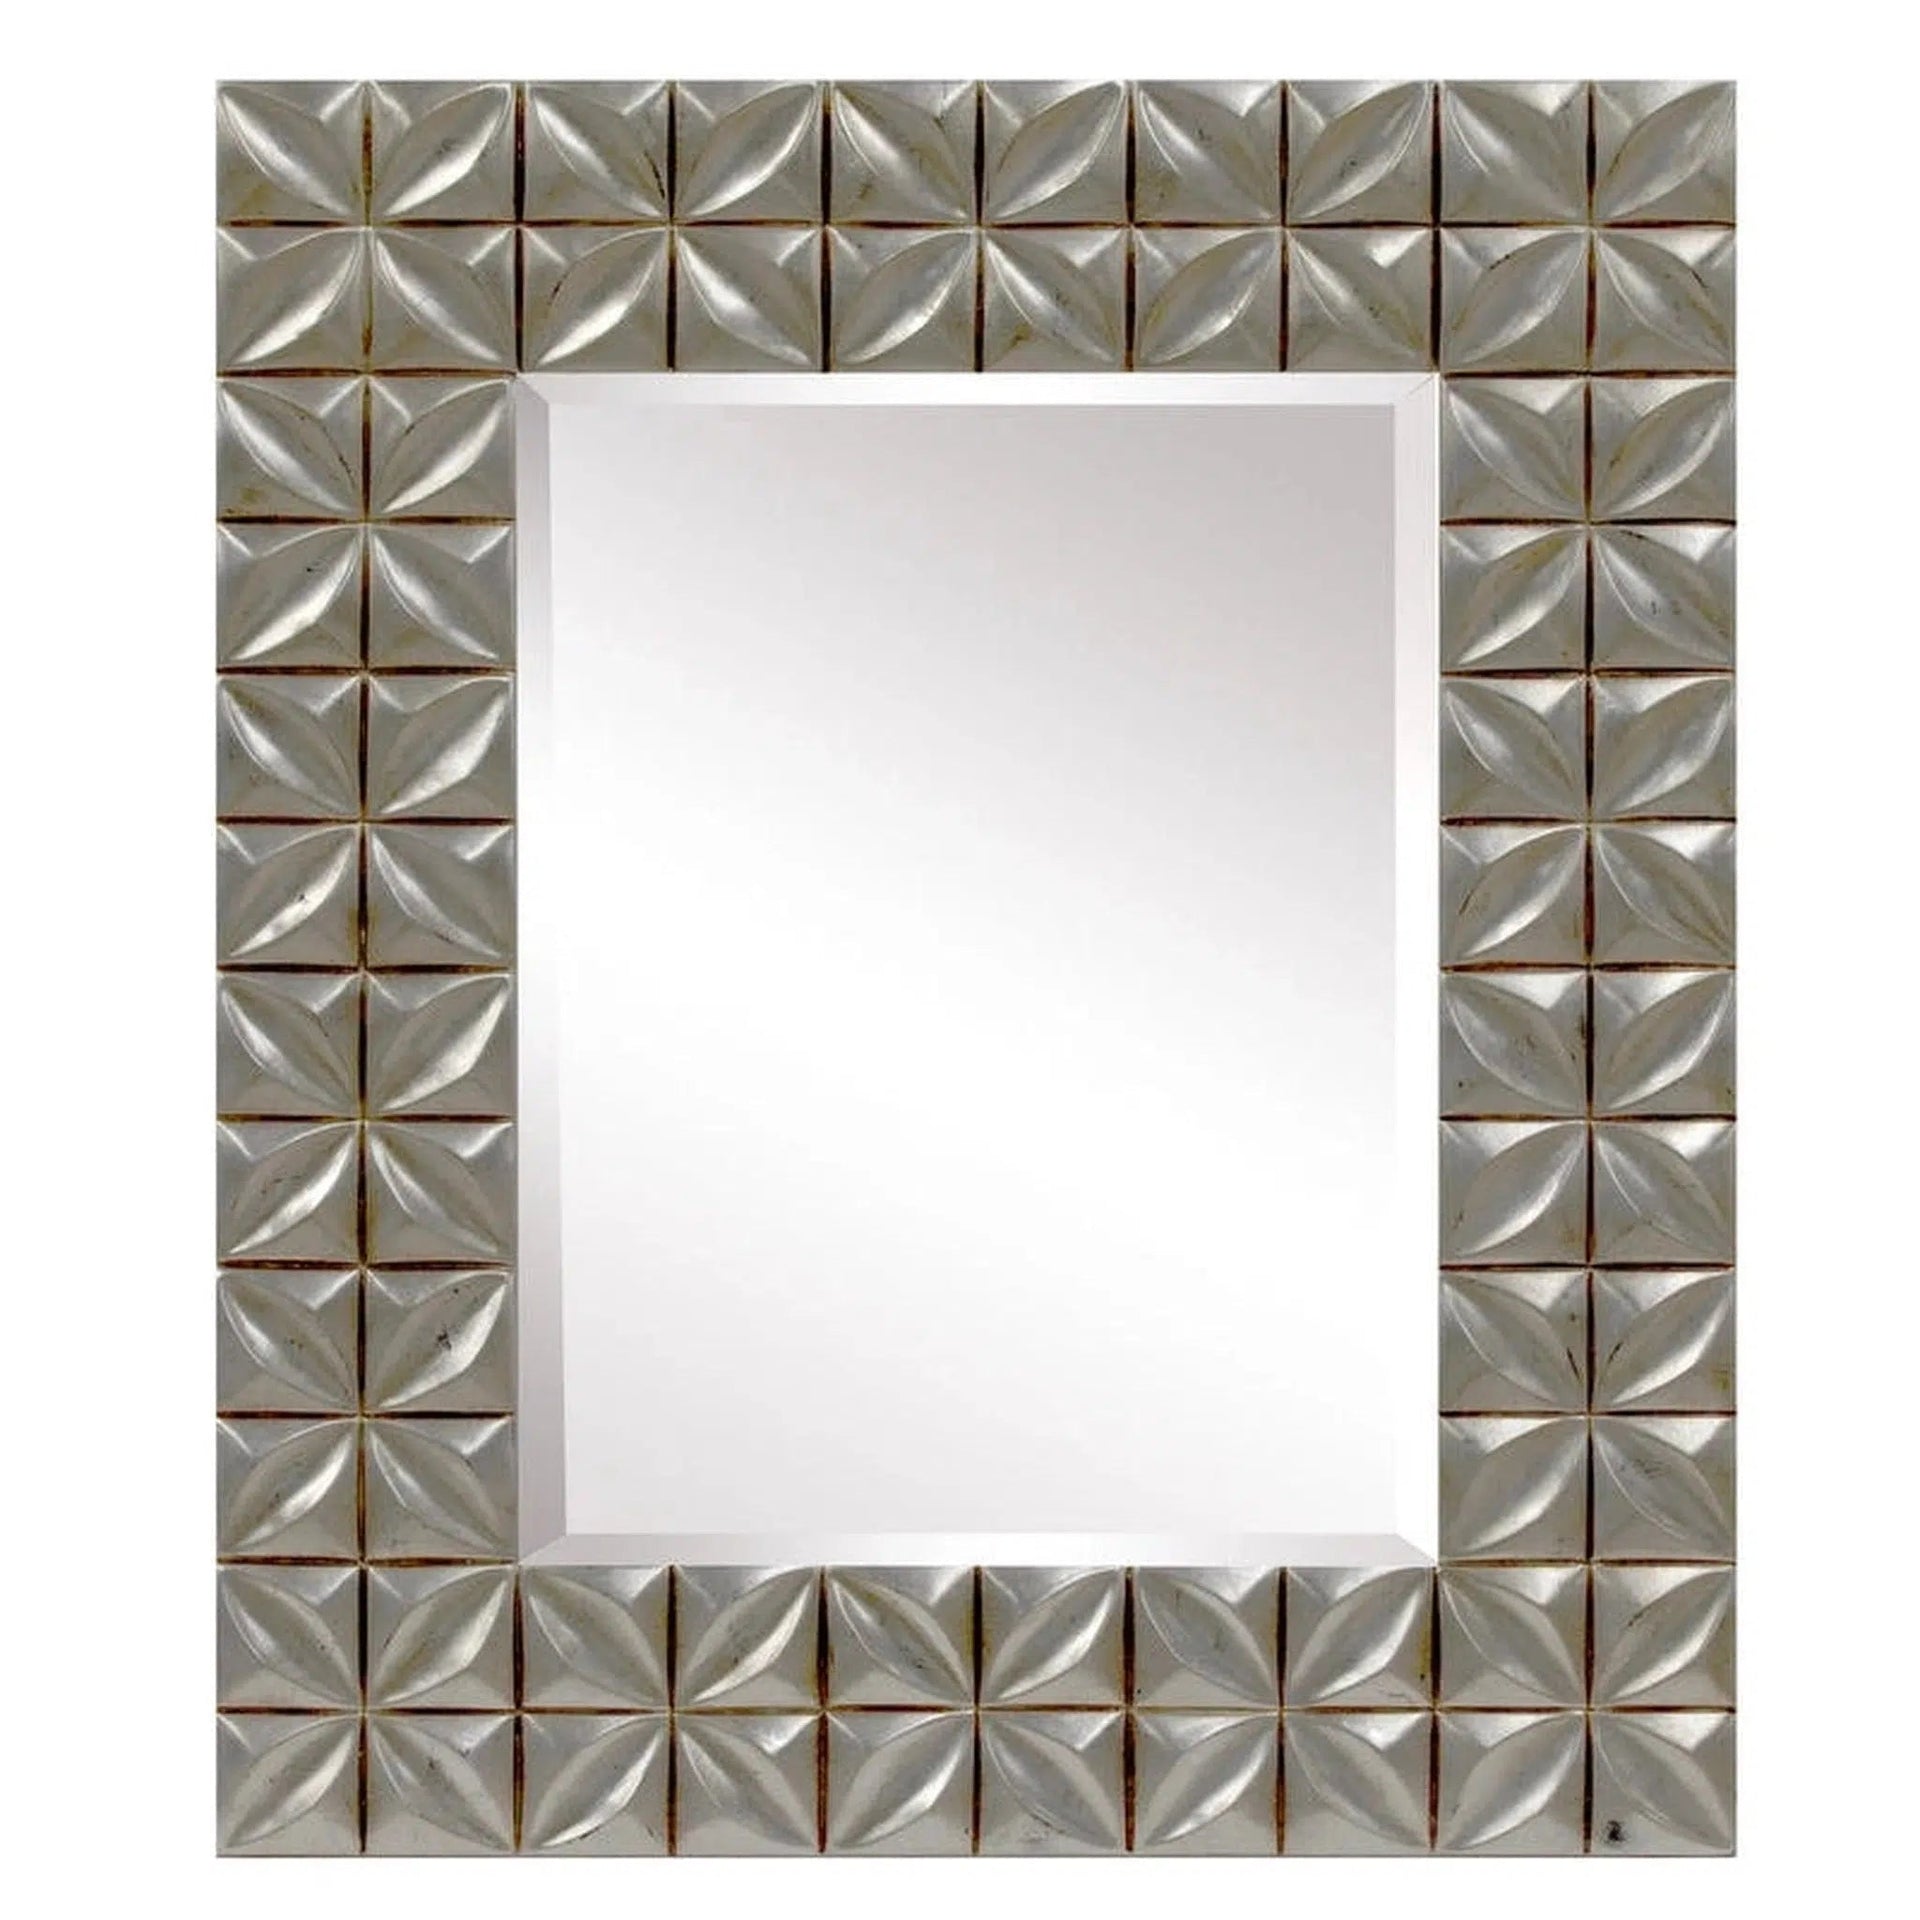 https://usbathstore.com/cdn/shop/products/SBC-Decor-Crystal-35-x-42-Wall-Mounted-Resin-Frame-Accent-Wall-Mirror-In-Distressed-Silver-Finish.webp?v=1658766018&width=1920